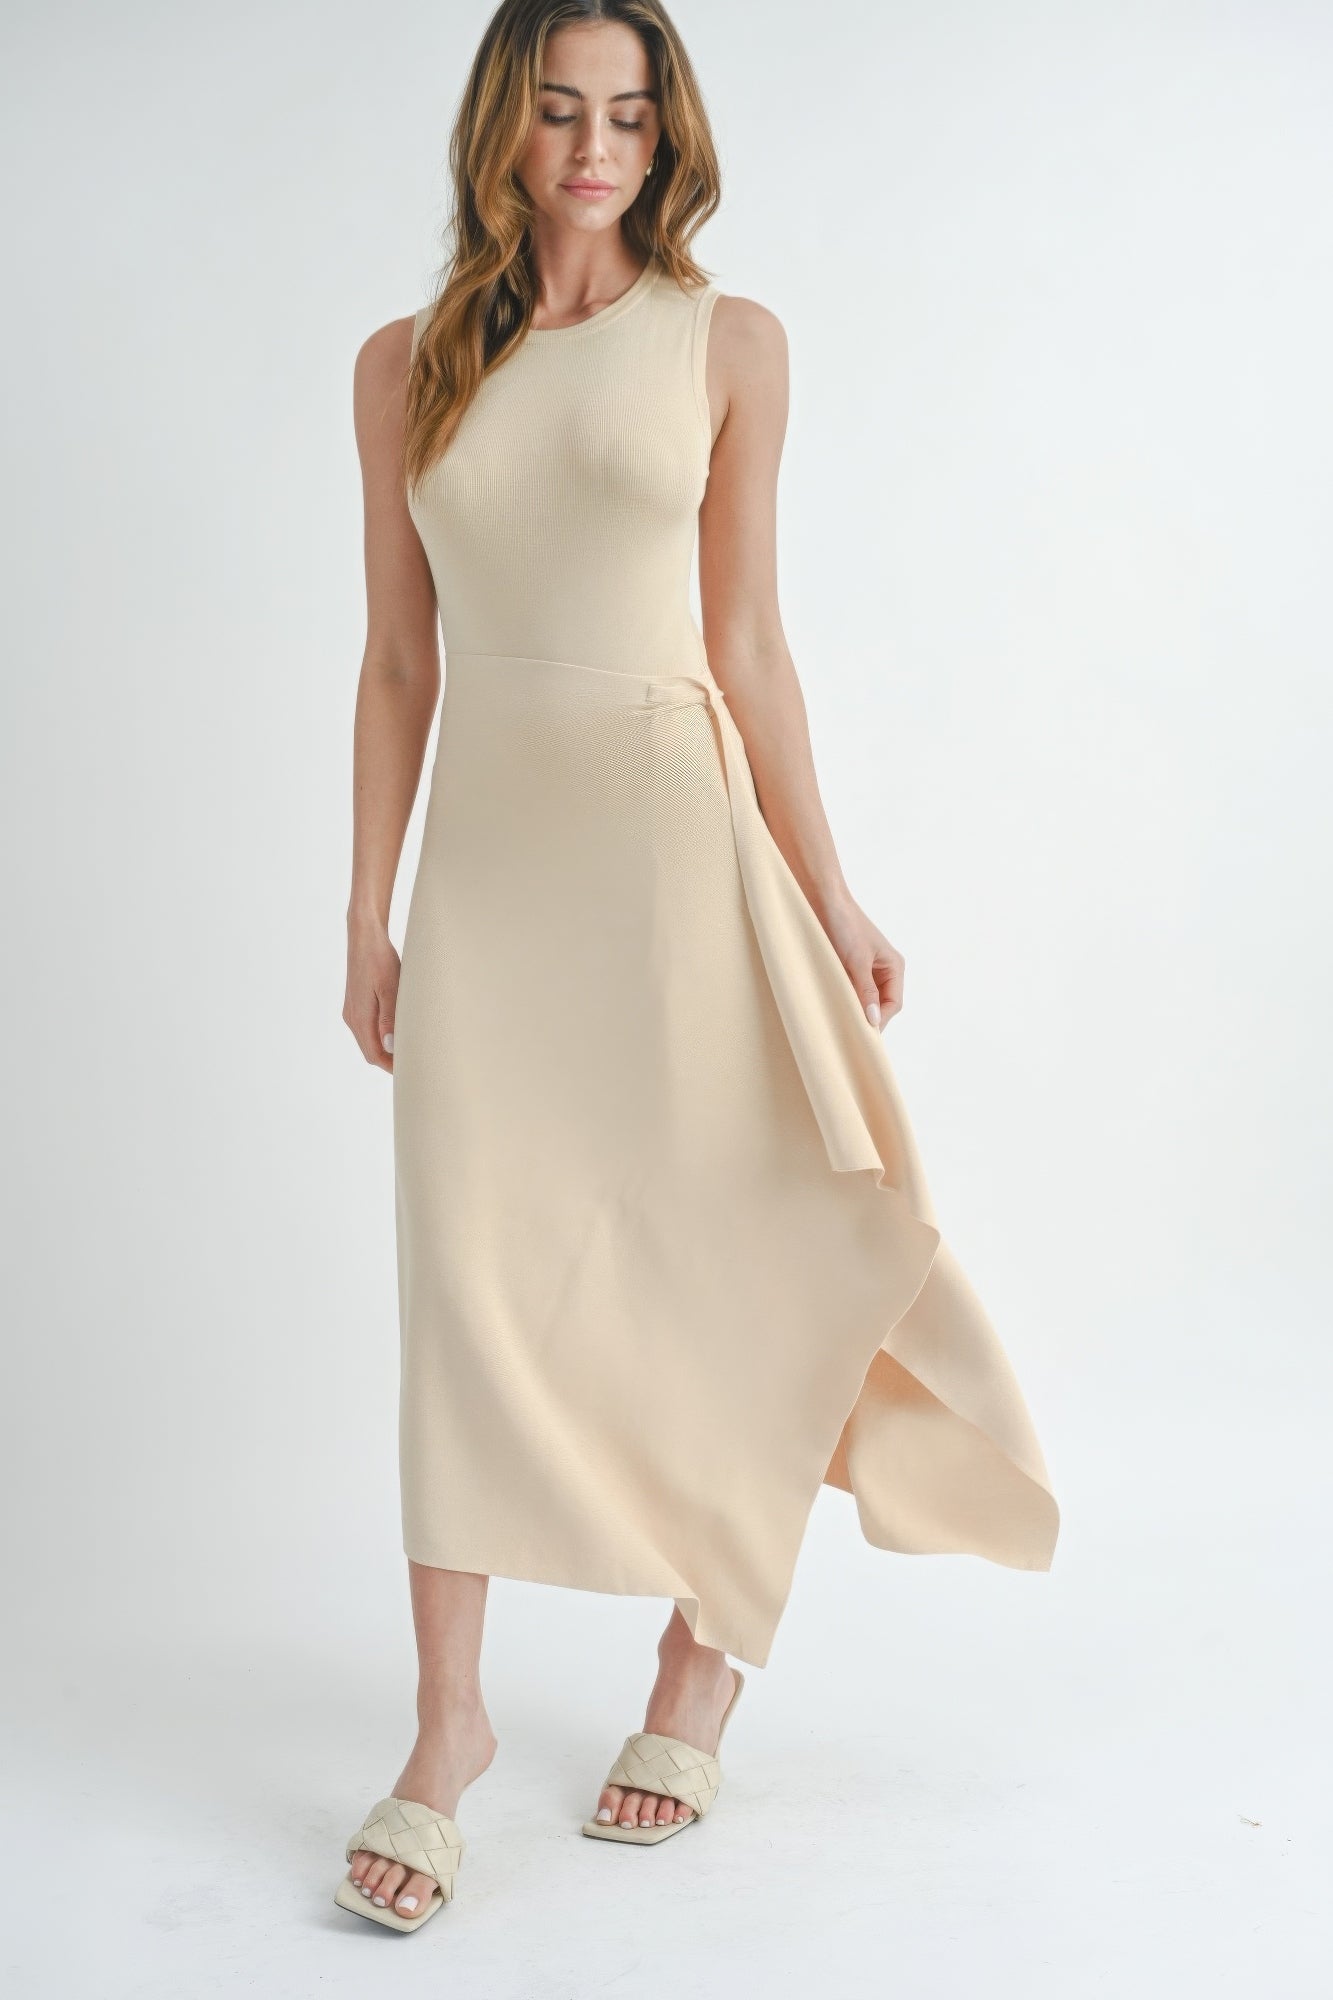 Natural Beige Maxi Dress with Side Slit - Tigbul's Variety Fashion Shop